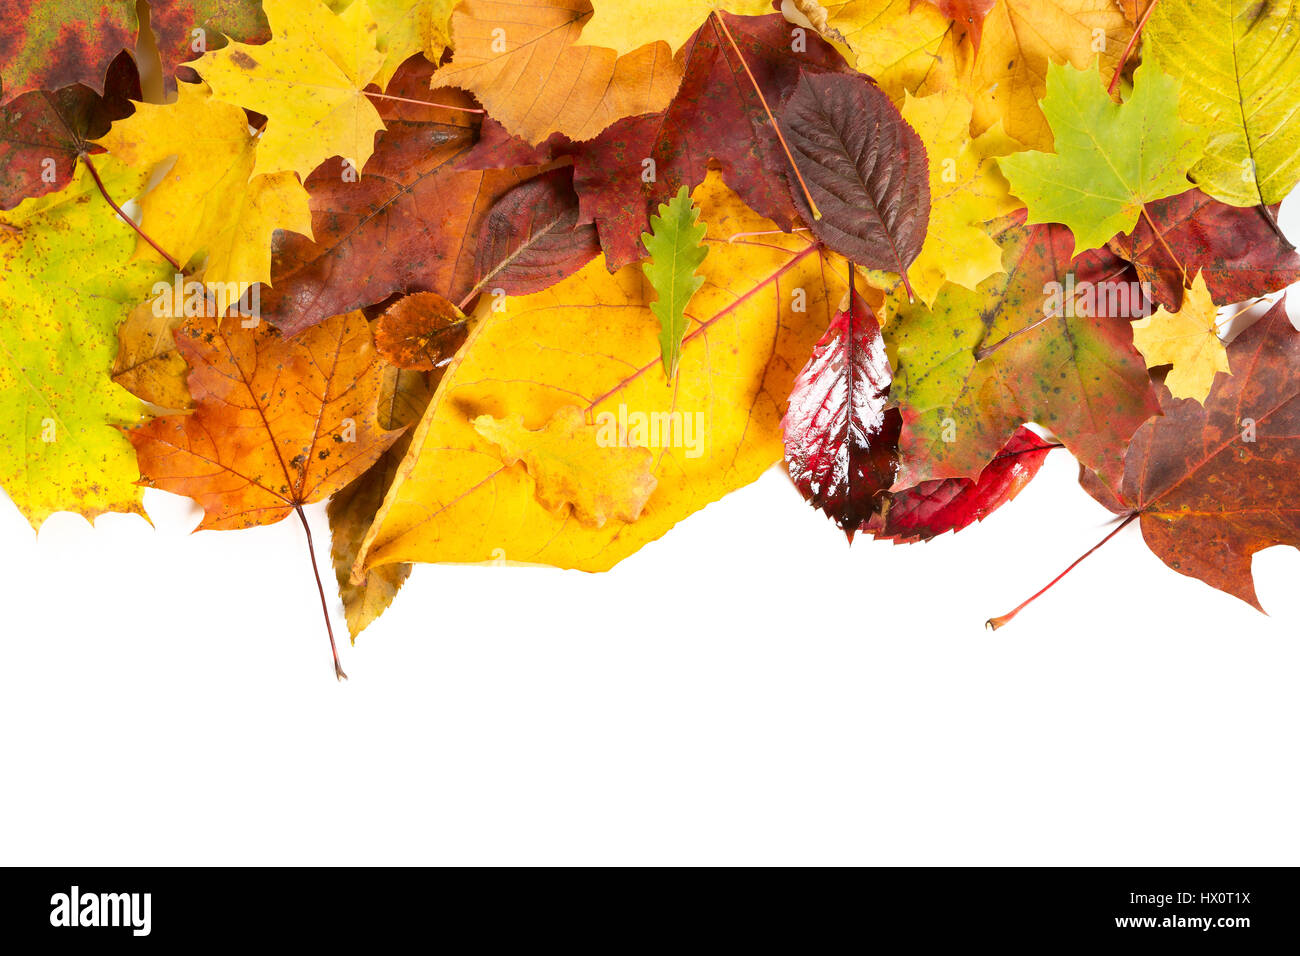 Autumn fall leaves on white background Stock Photo